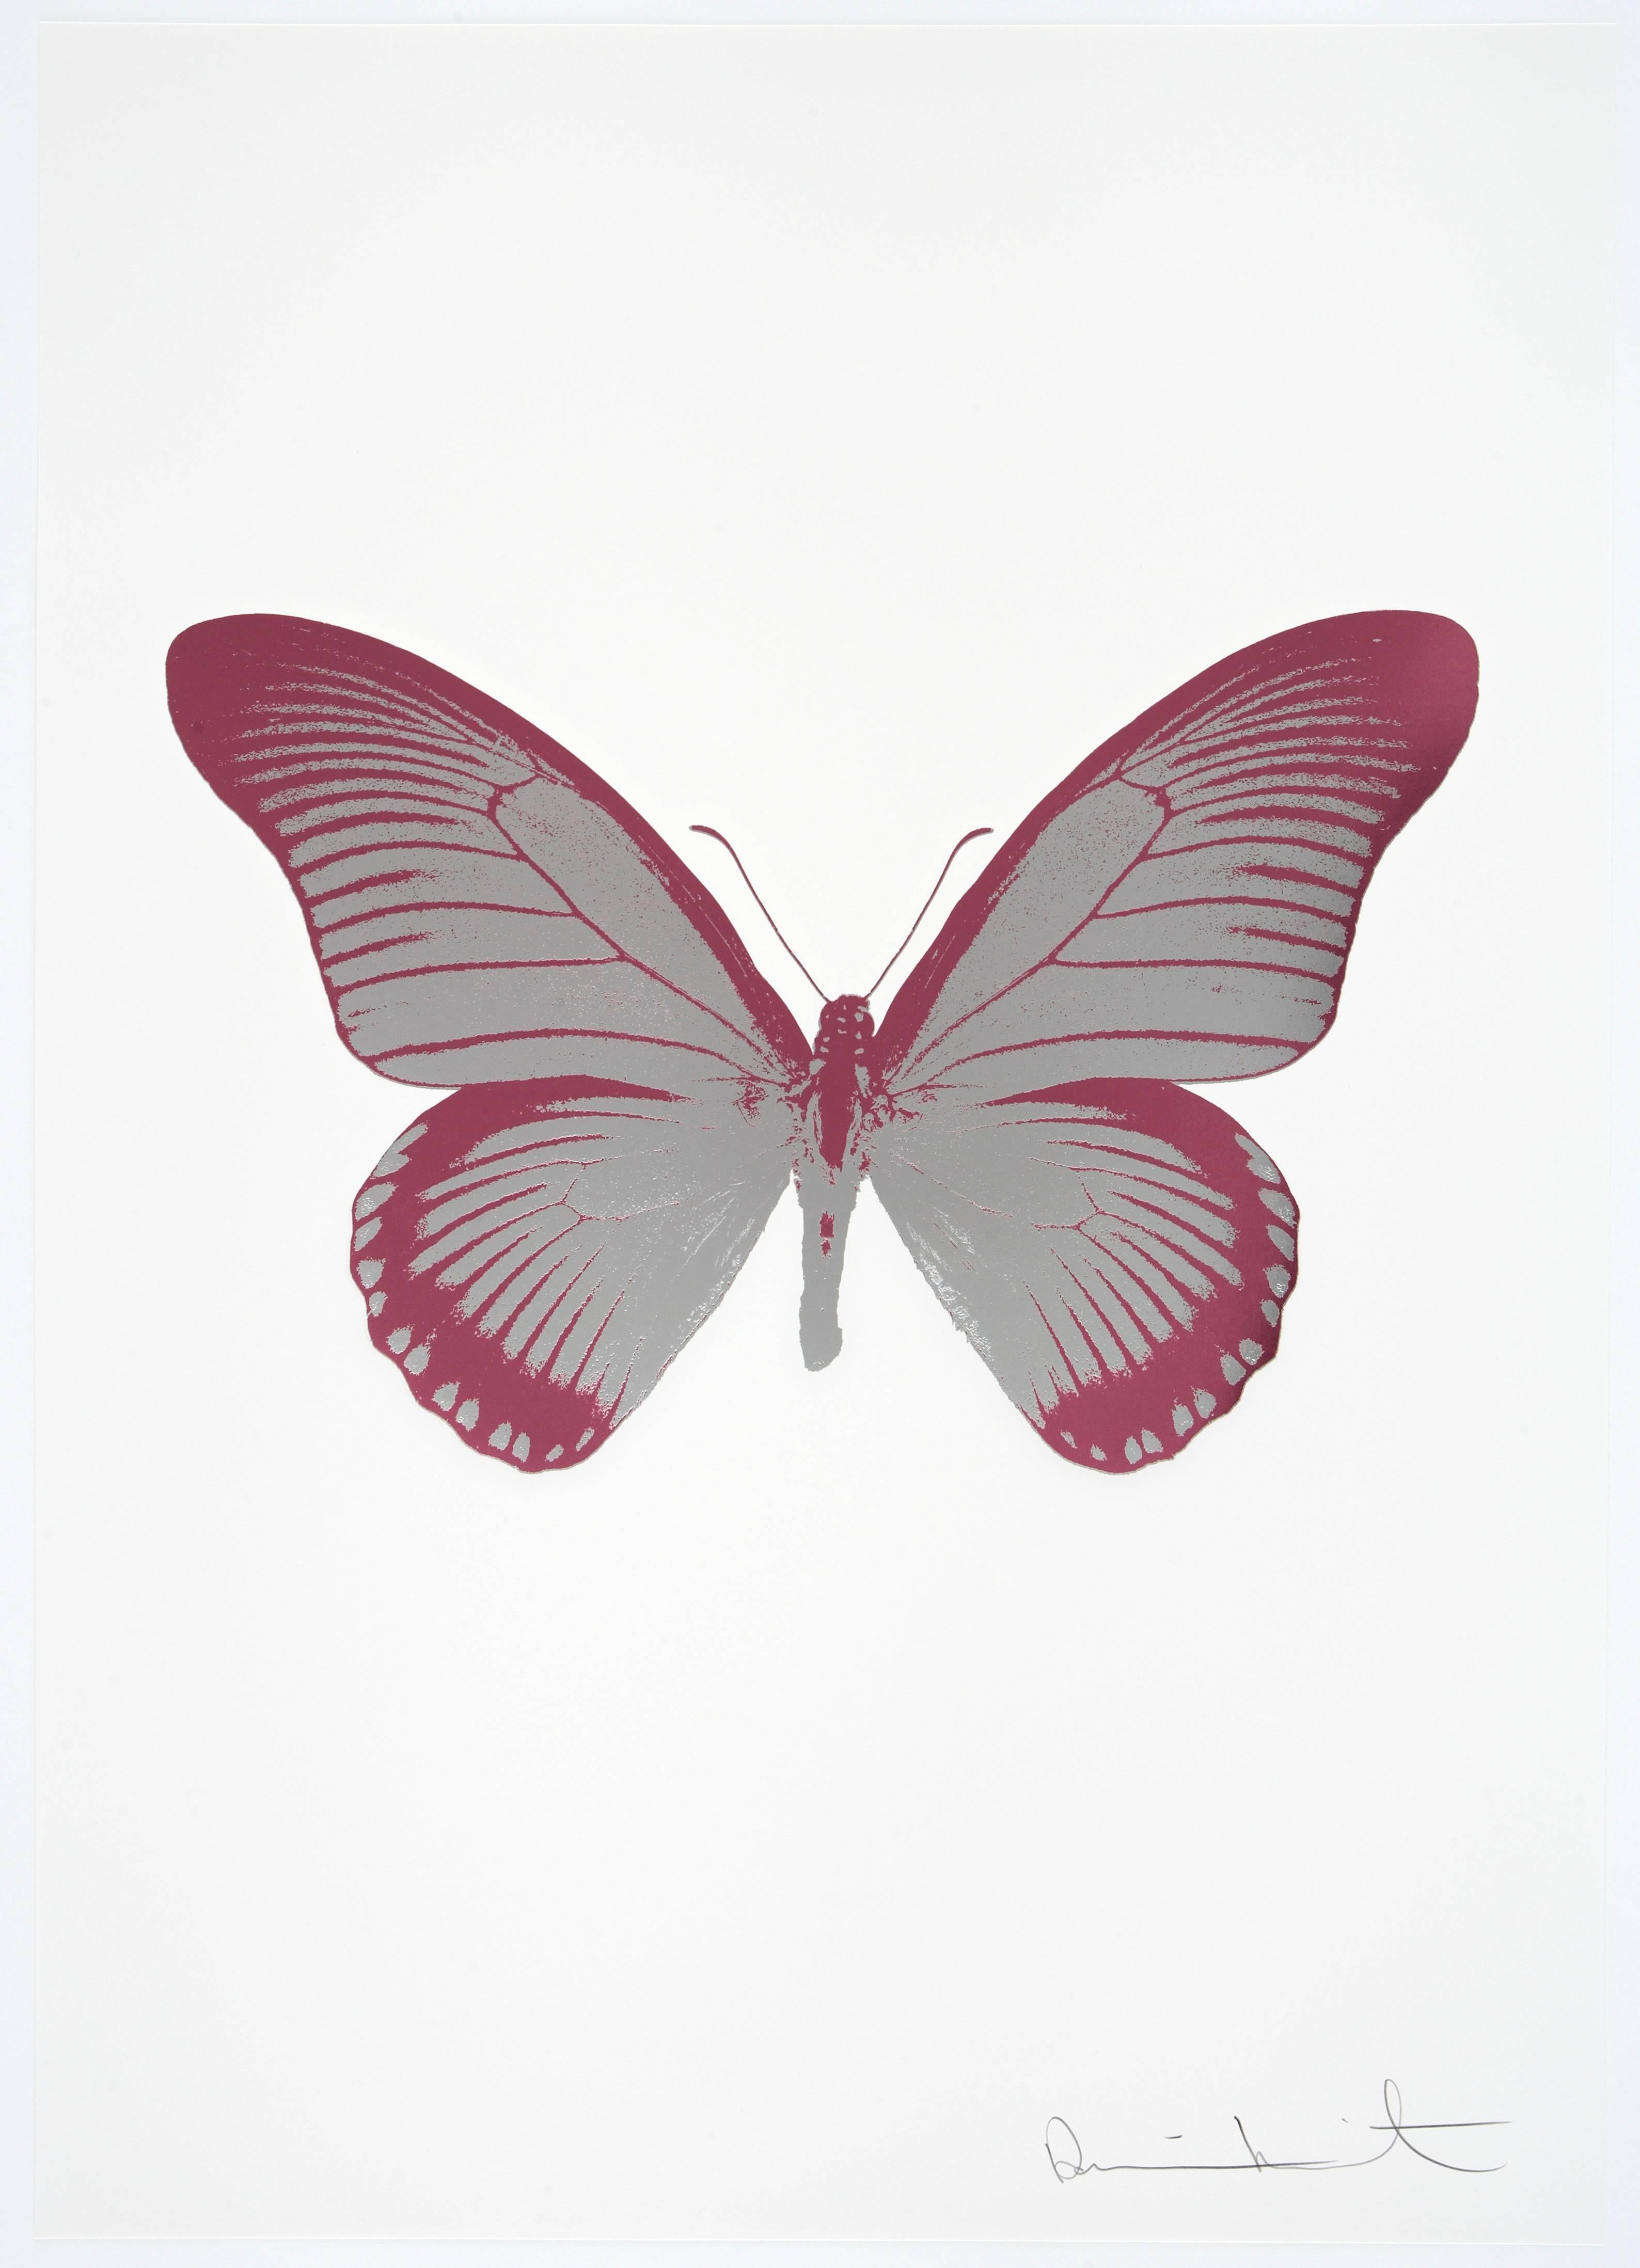 Damien Hirst Animal Print - The Souls IV - Silver Gloss/Loganberry Pink